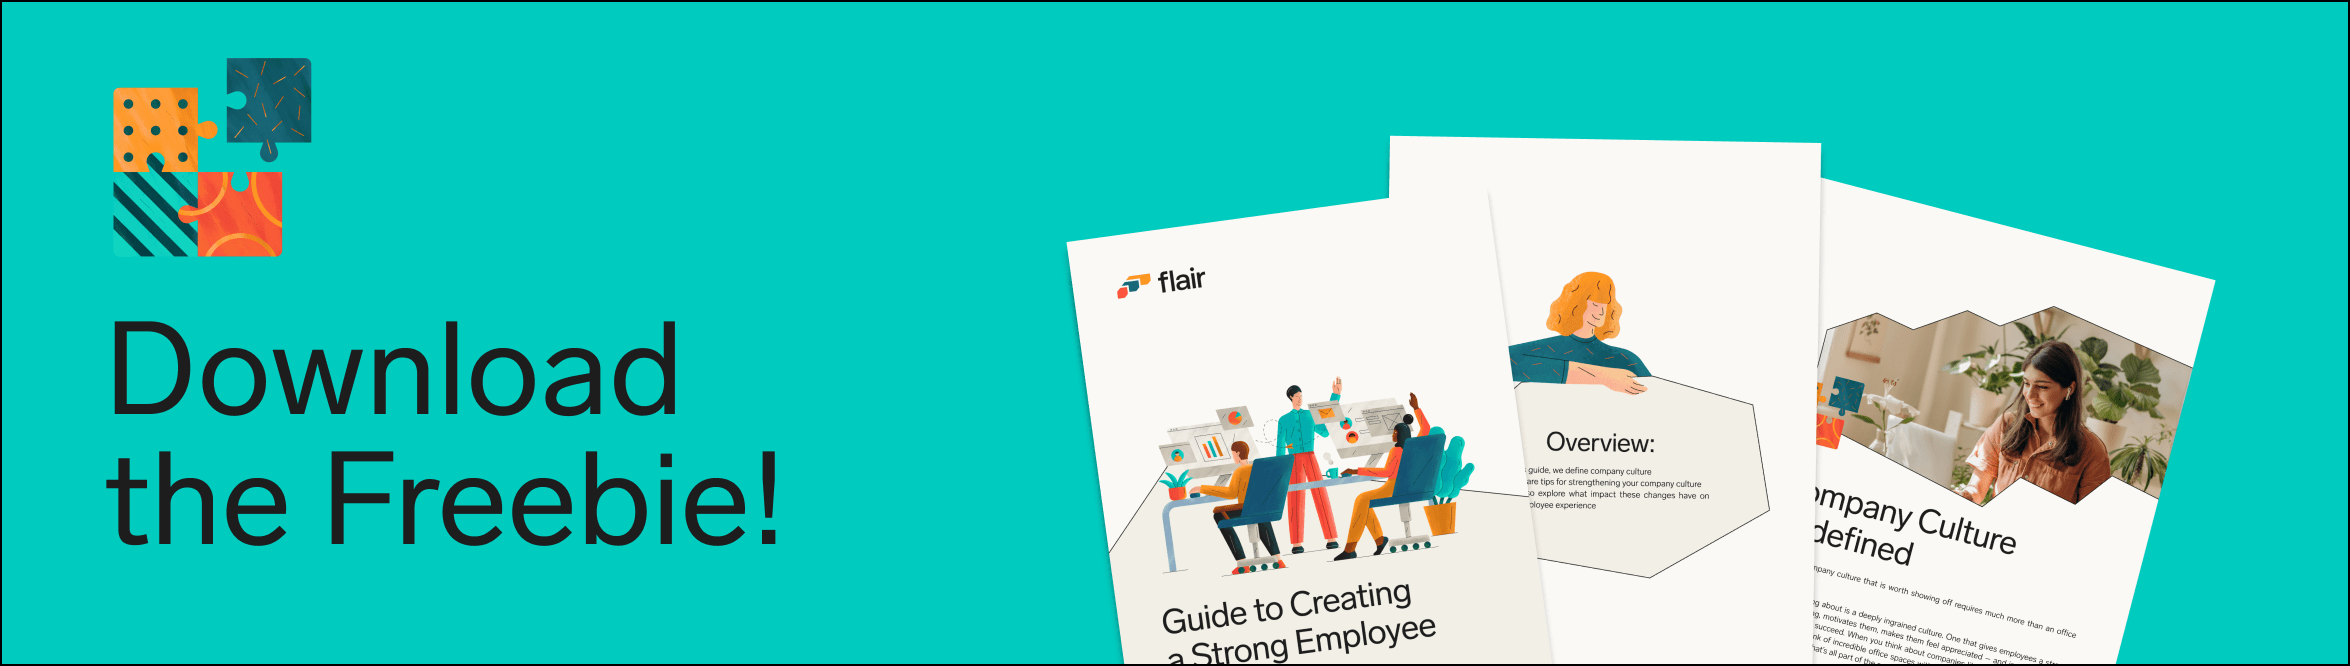 Employee experience guide free download